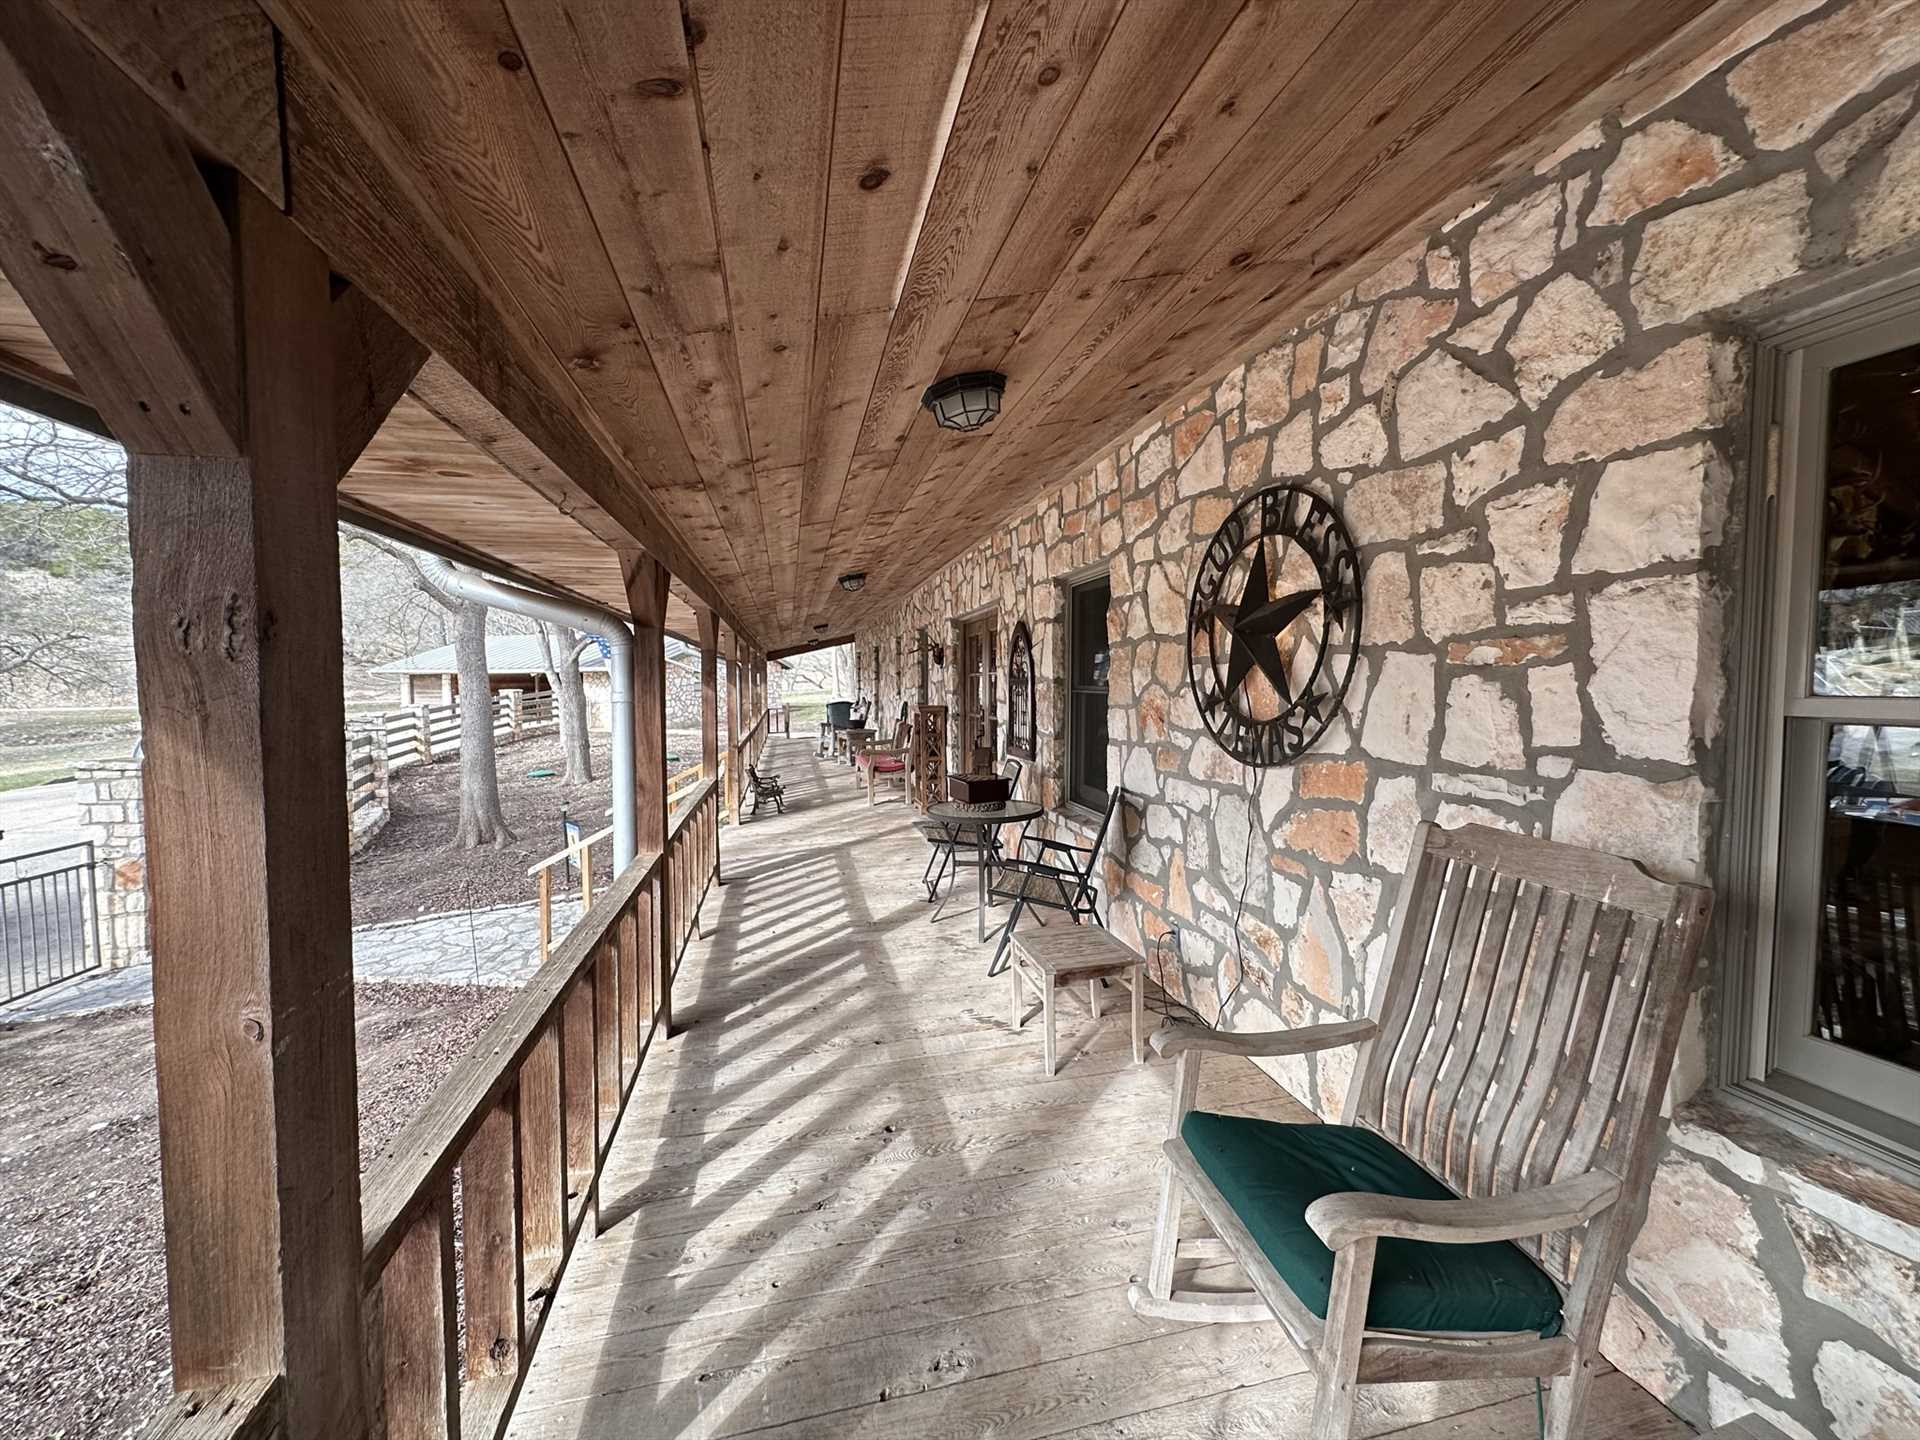                                                 The shaded front porch features outdoor seating for everyone...there's even chairs for the little ones!